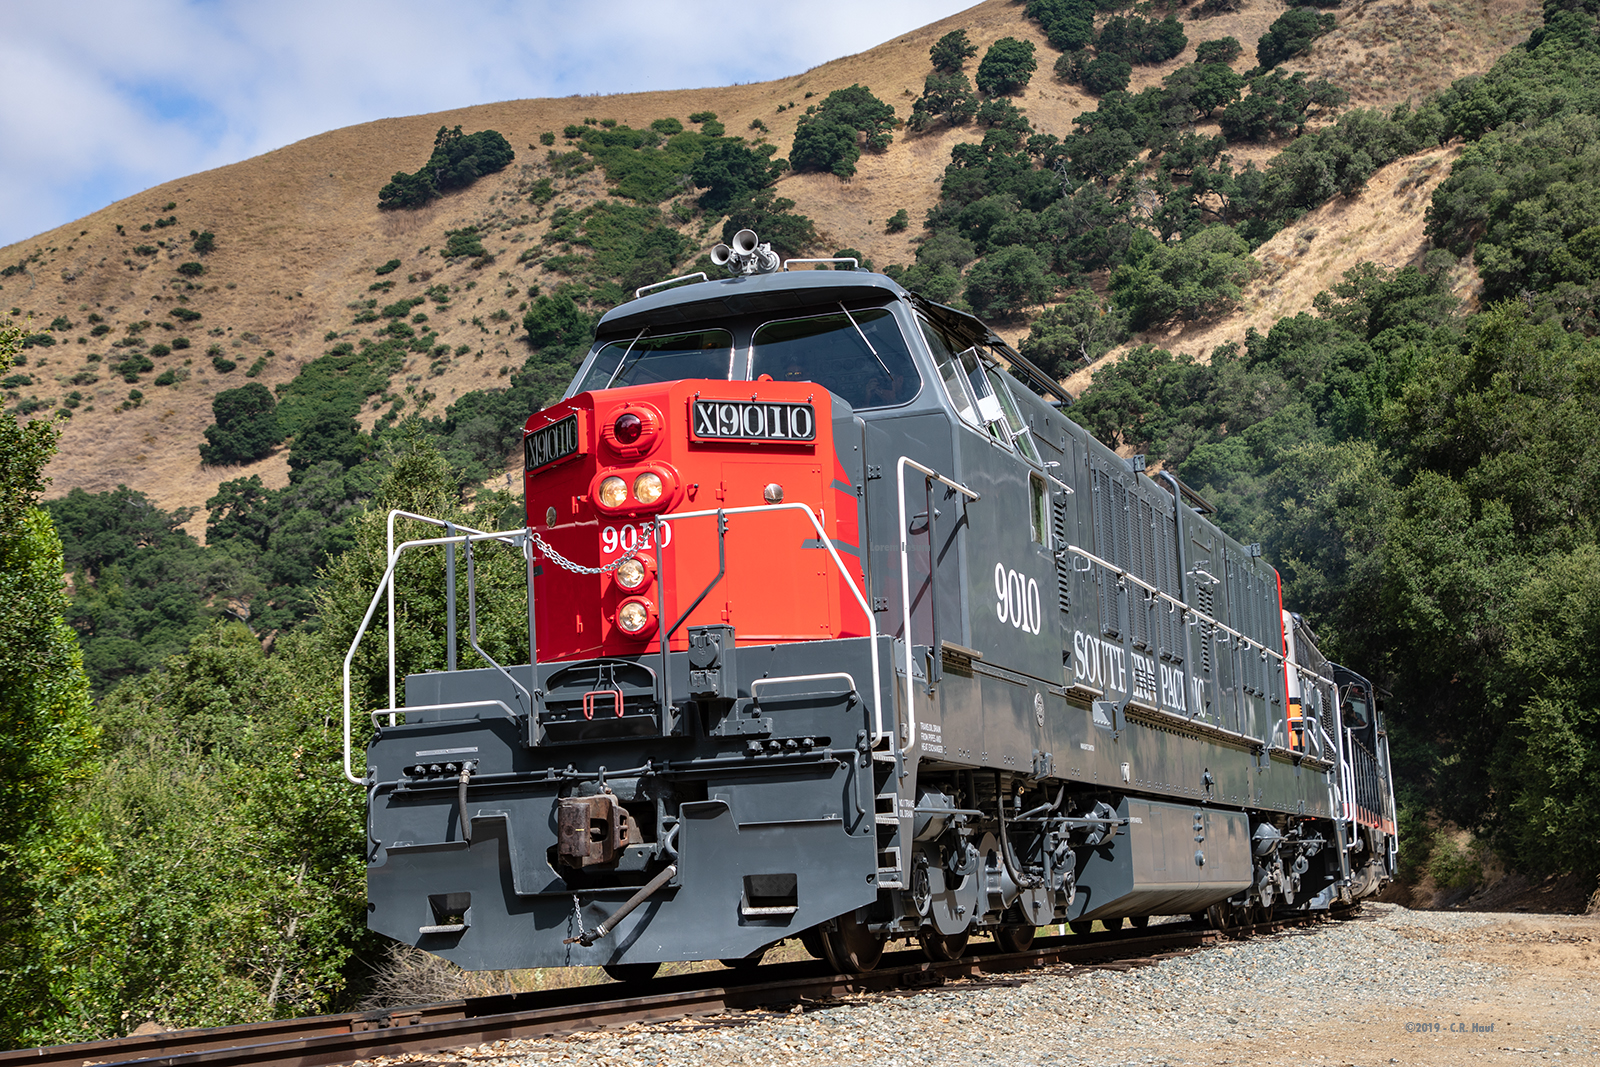 The very unique German-built diesel hydraulic locomotive once owned by the Southern Pacific Railroad and restored to that railroad's scarlet red and gray paint scheme rolls around a sweeping curve on the railroad.